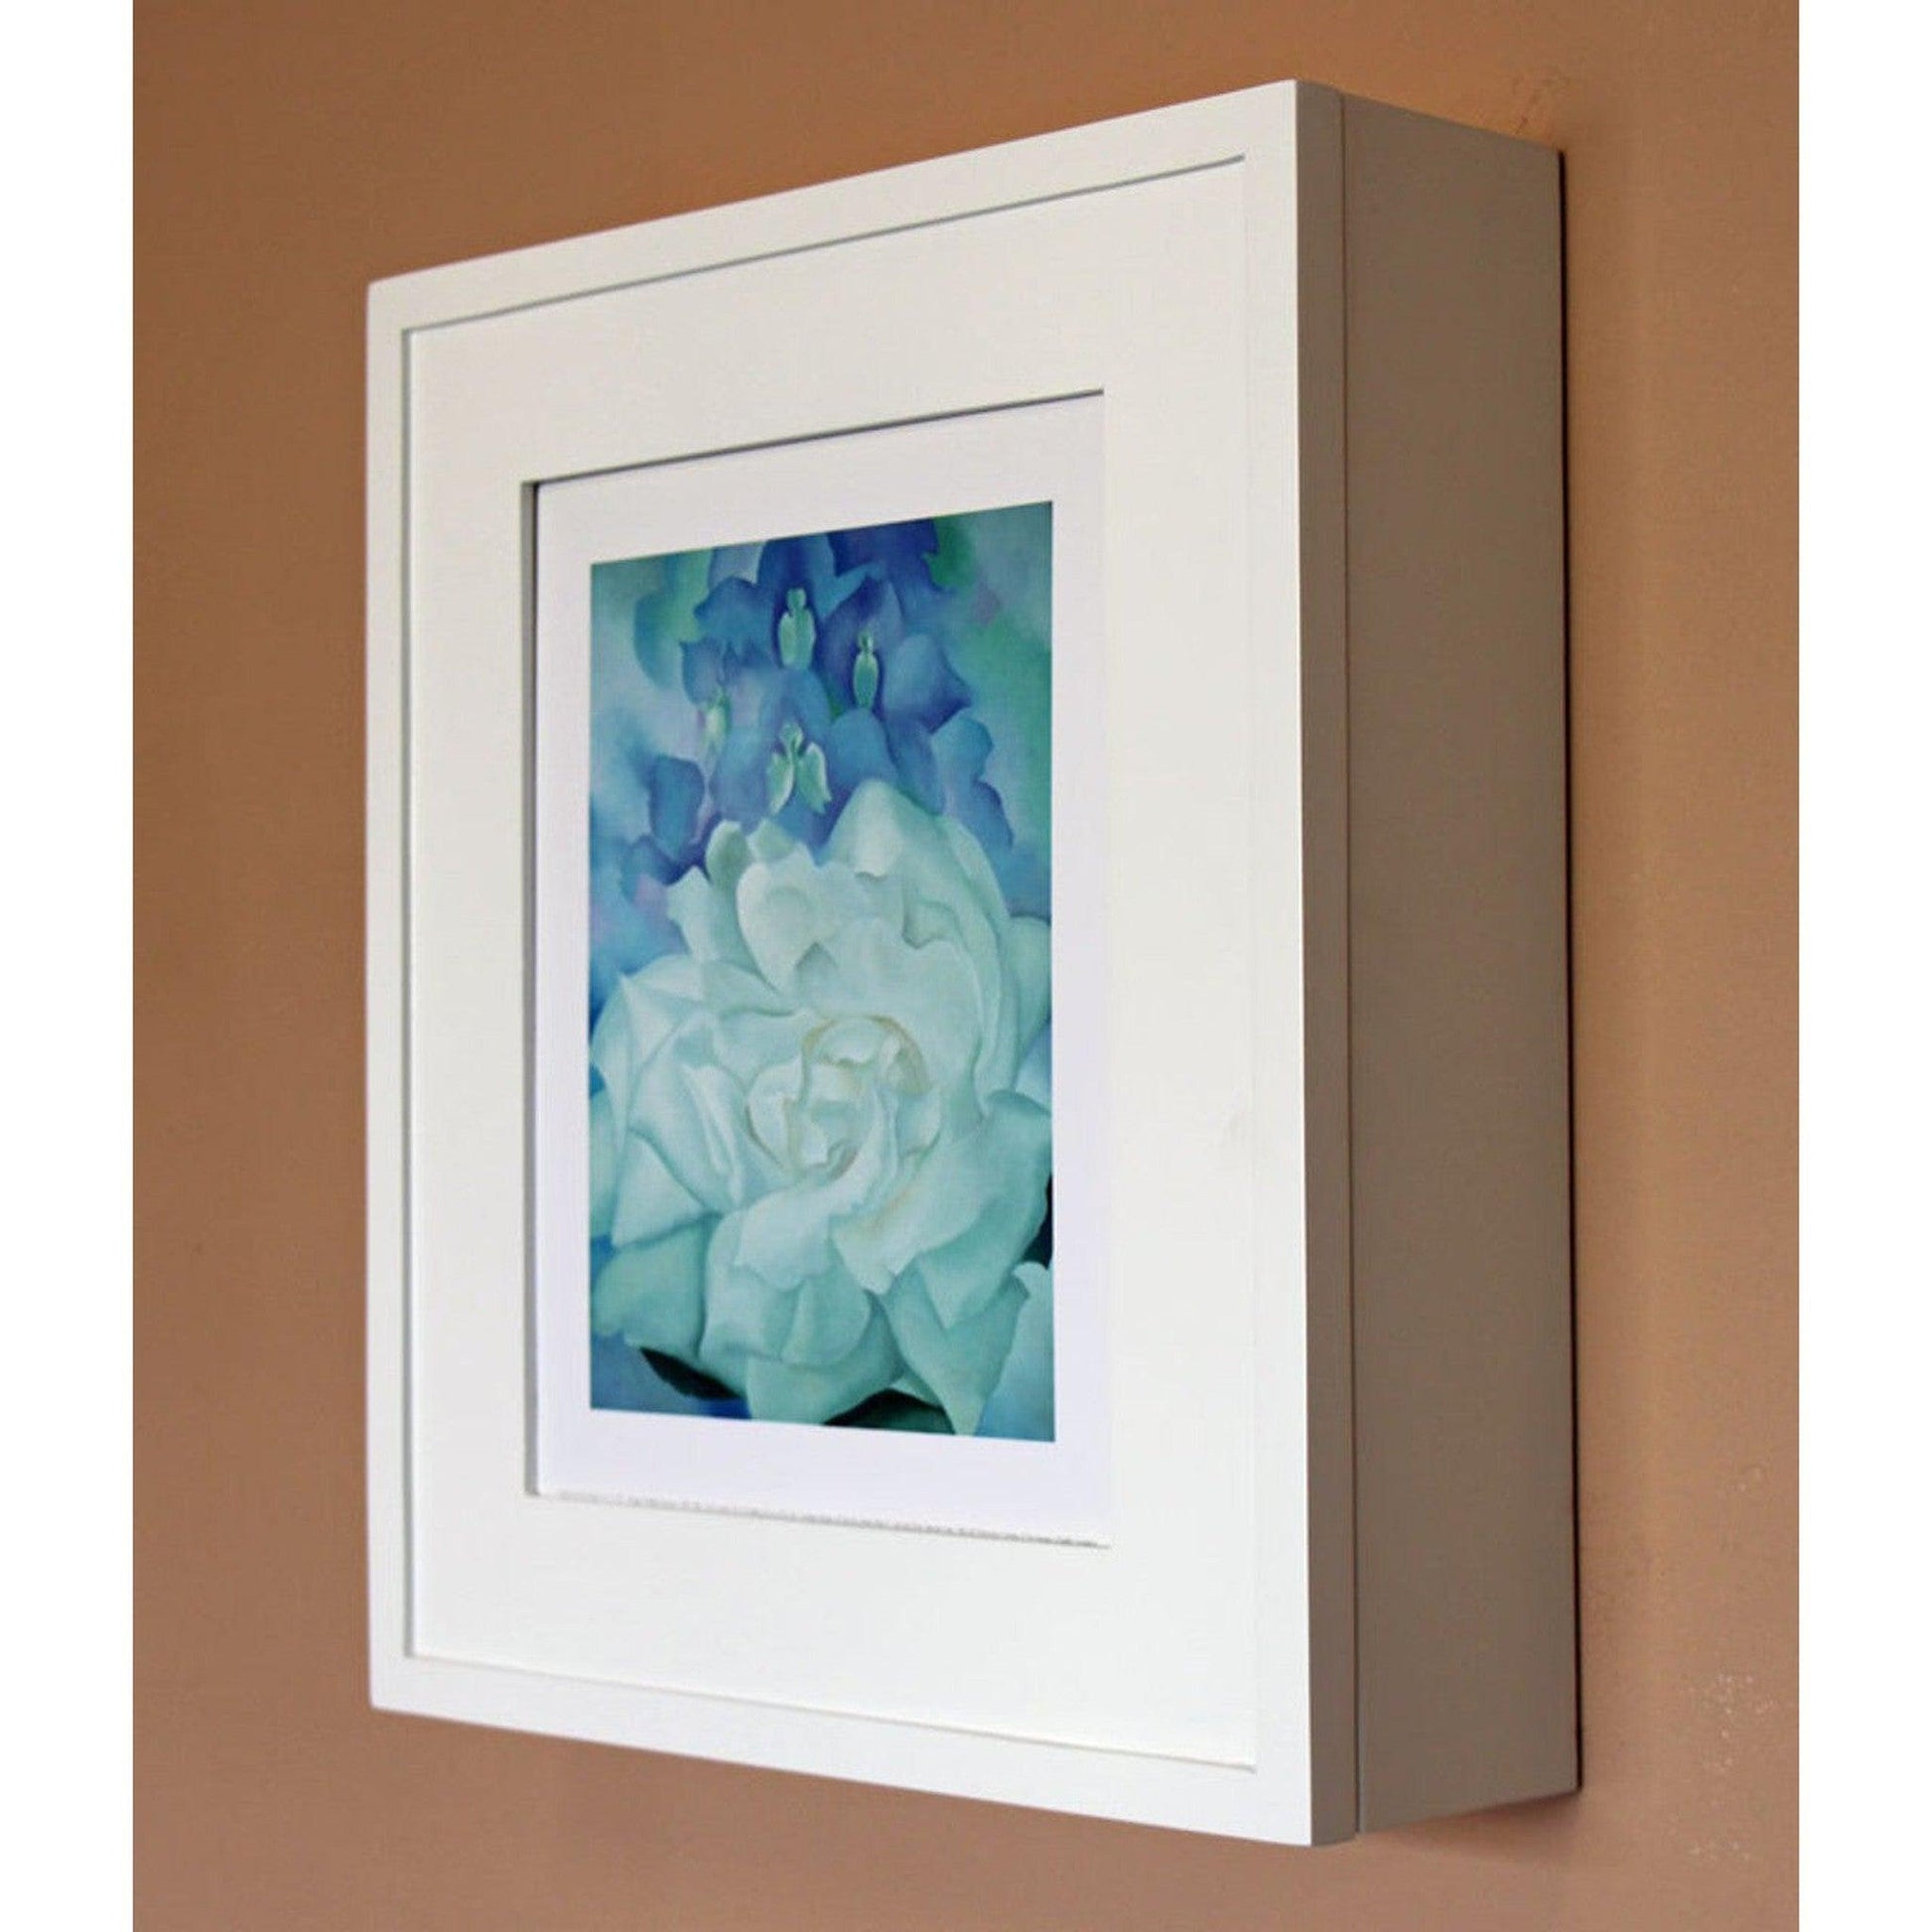 Fox Hollow Furnishings 20" x 17" White Contemporary Wall Mount Picture Frame Medicine Cabinet With White 8" x 10" Cabinet